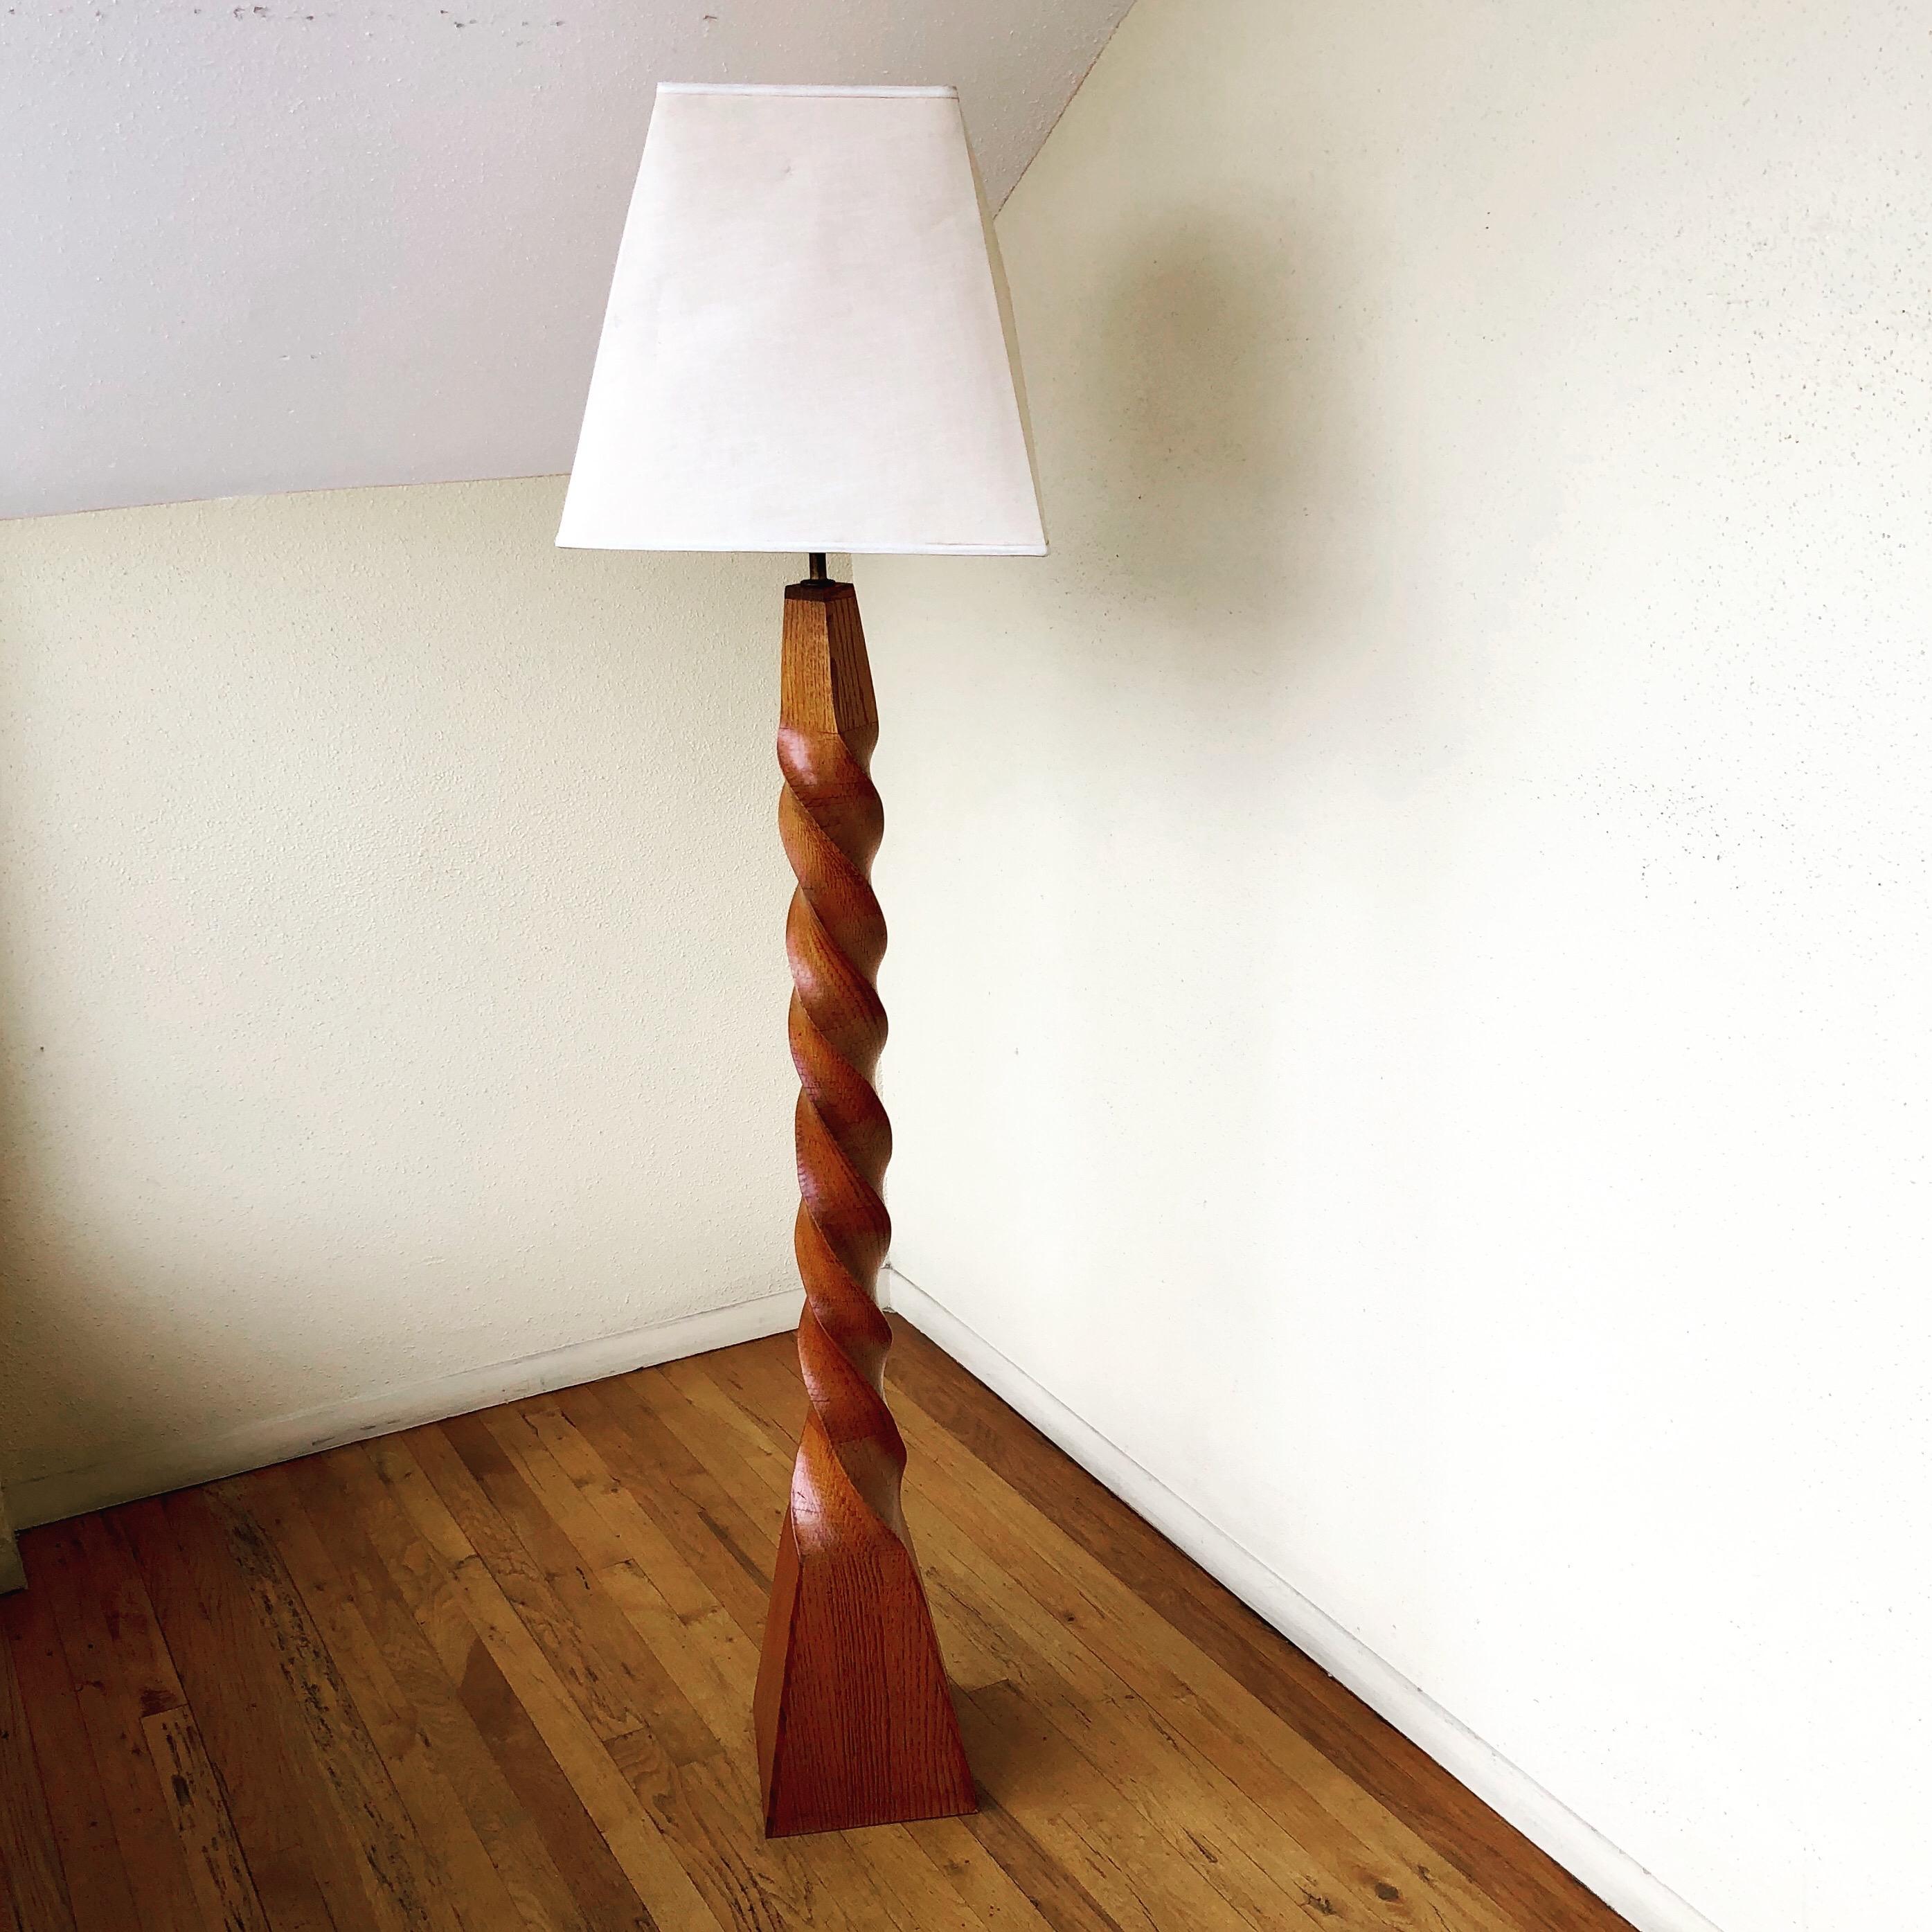 One of a kind sculpted wood floor lamp, incredible detail the lamp tapers from bottom to top, the lampshade is not included due to condition. The lamp its 68